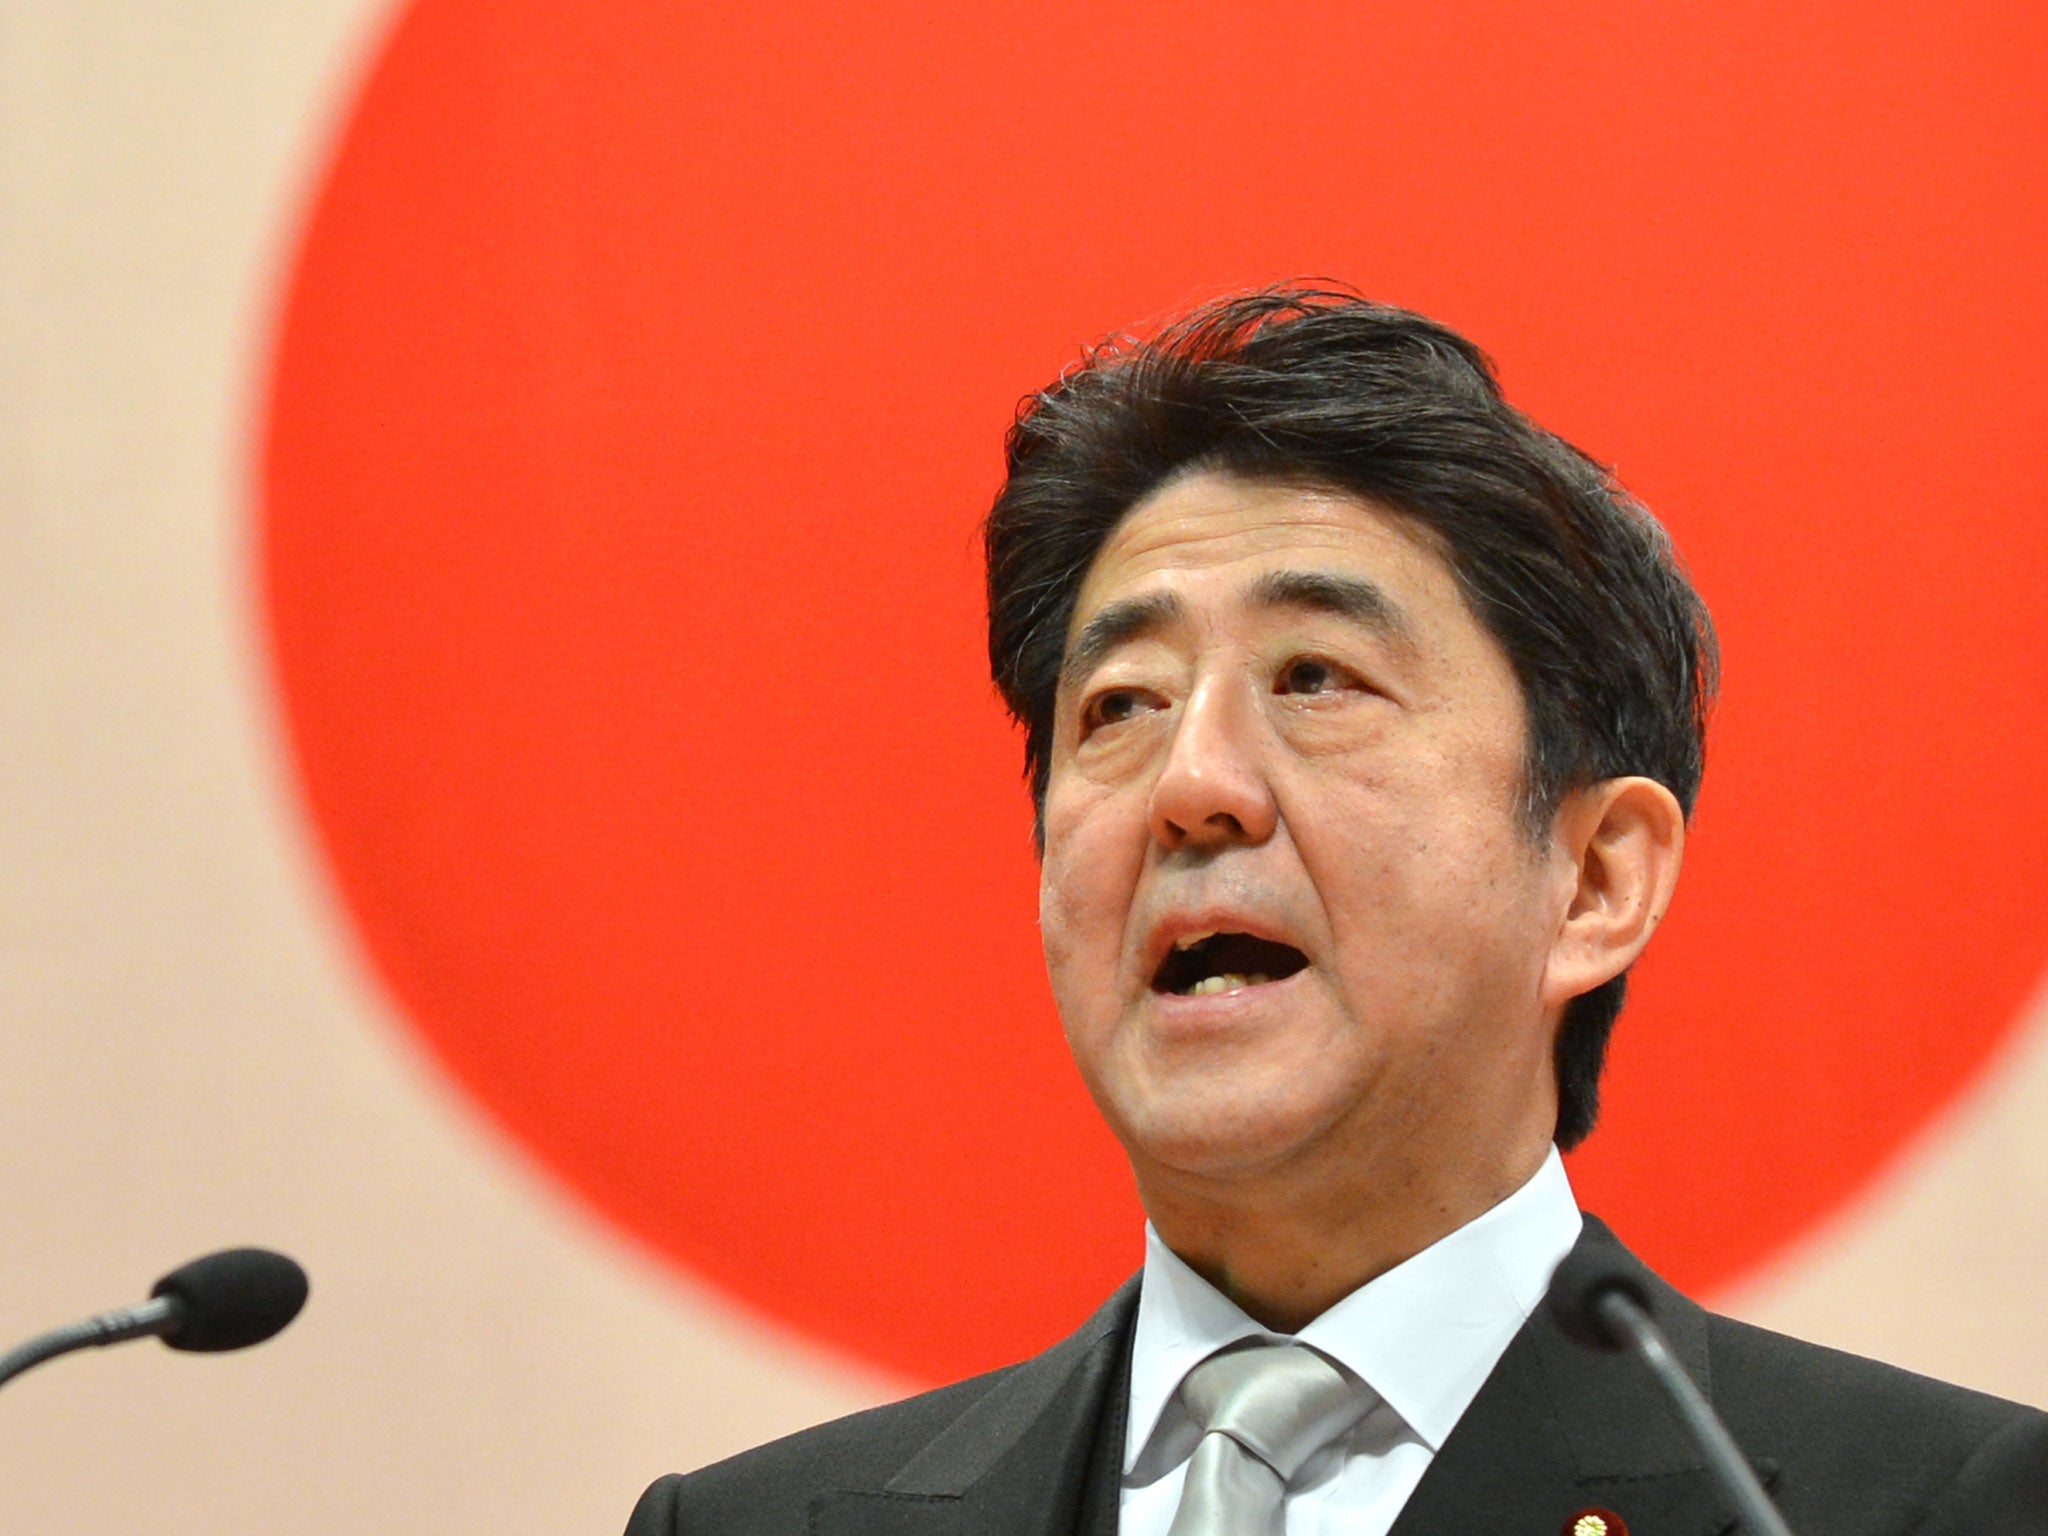 Mr Abe described the threat as "unforgivable" and demanded that Isis immediately release the men